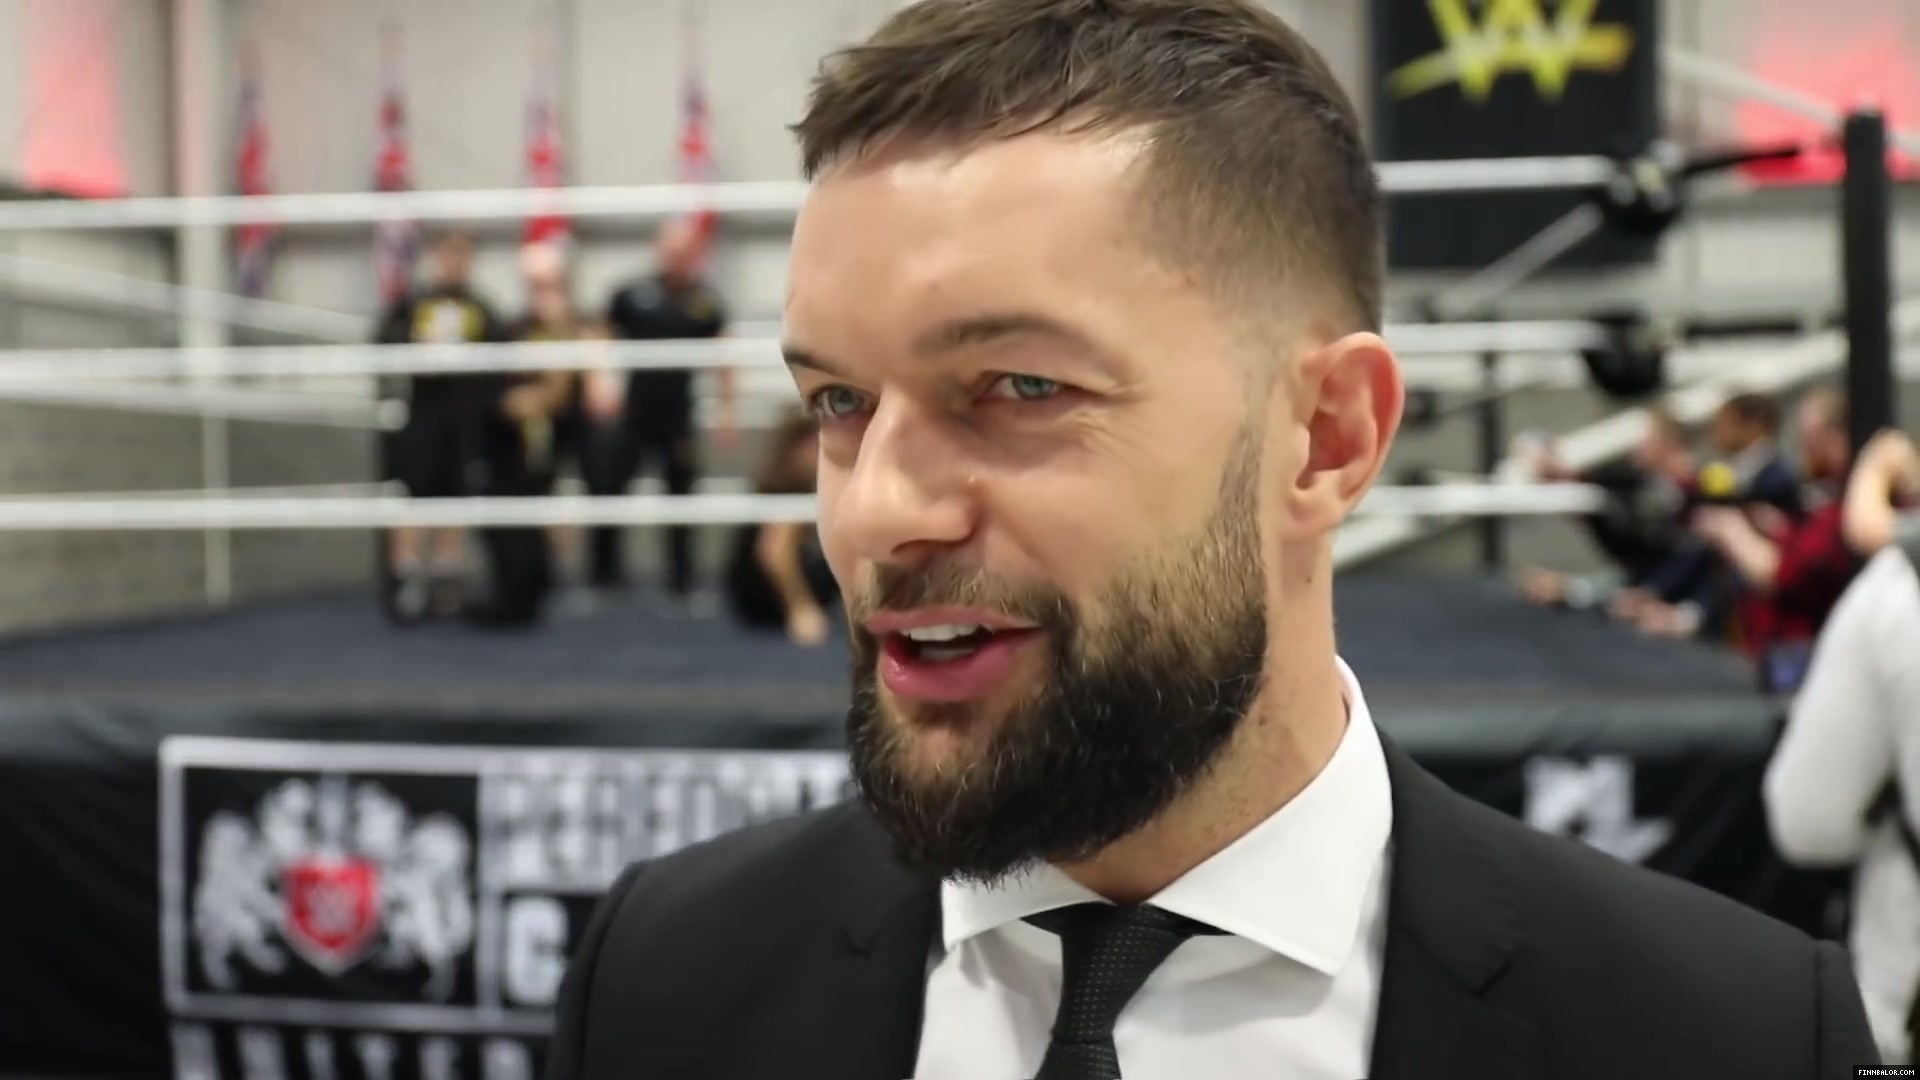 WWE_Superstar_FINN_BALOR_joins_MOUSTACHE_MOUNTAIN_at_the_opening_of_the_NXT_UK_PC_068.jpg